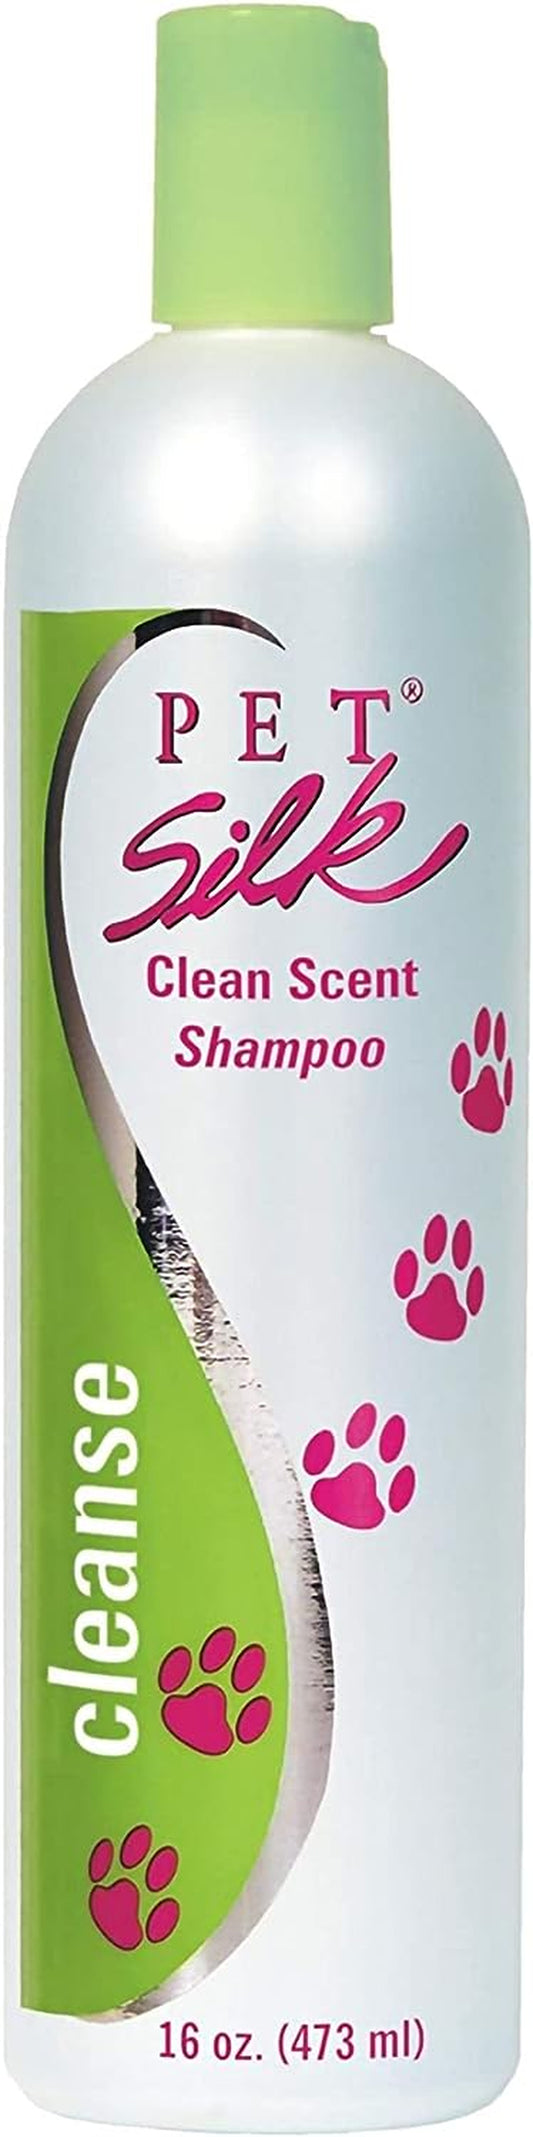 PET SILK Shampoo - Long Lasting Fresh Scent - Clean and Condition Pet'S Fur - Gentle Odor Remover for Puppies, Dogs and Cats (Clean Scent - 16 Oz)